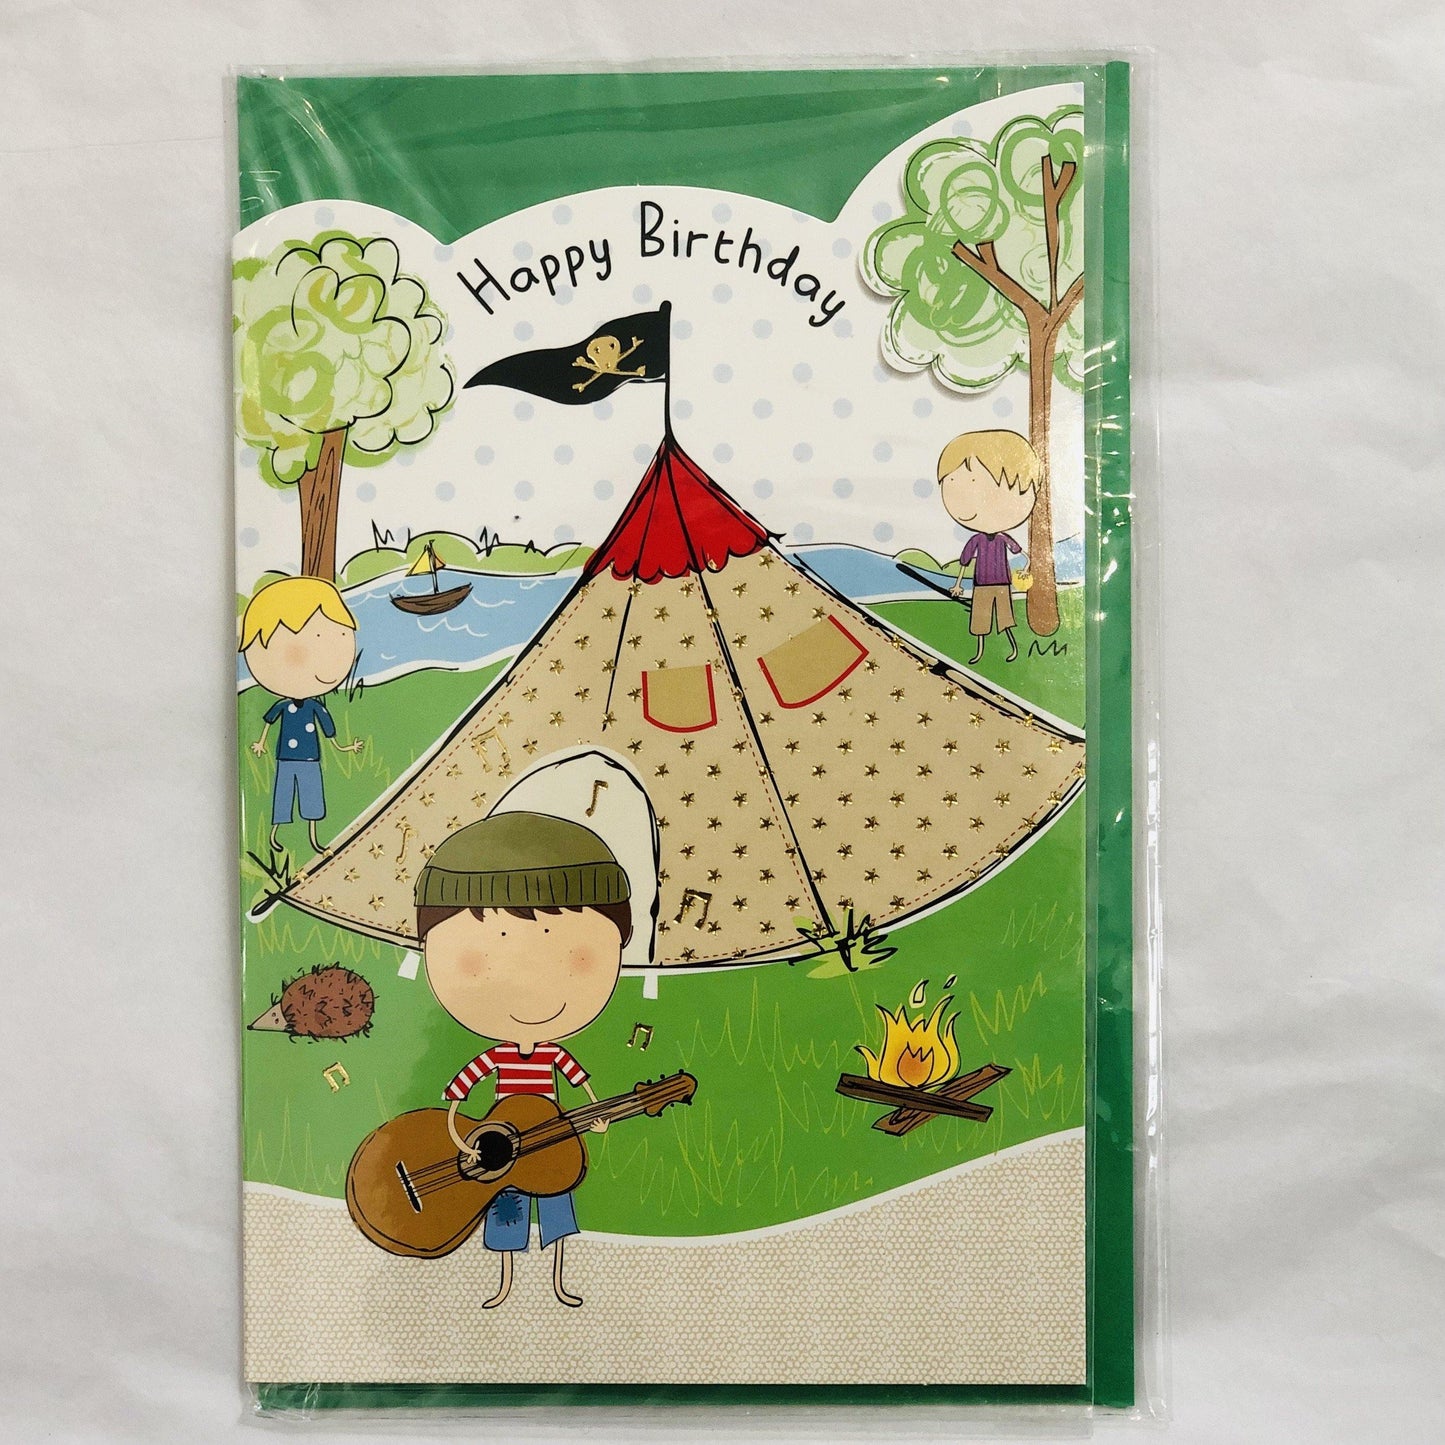 Happy Birthday Card | Oscar & Me | Baby & Children’s Clothing & Accessories